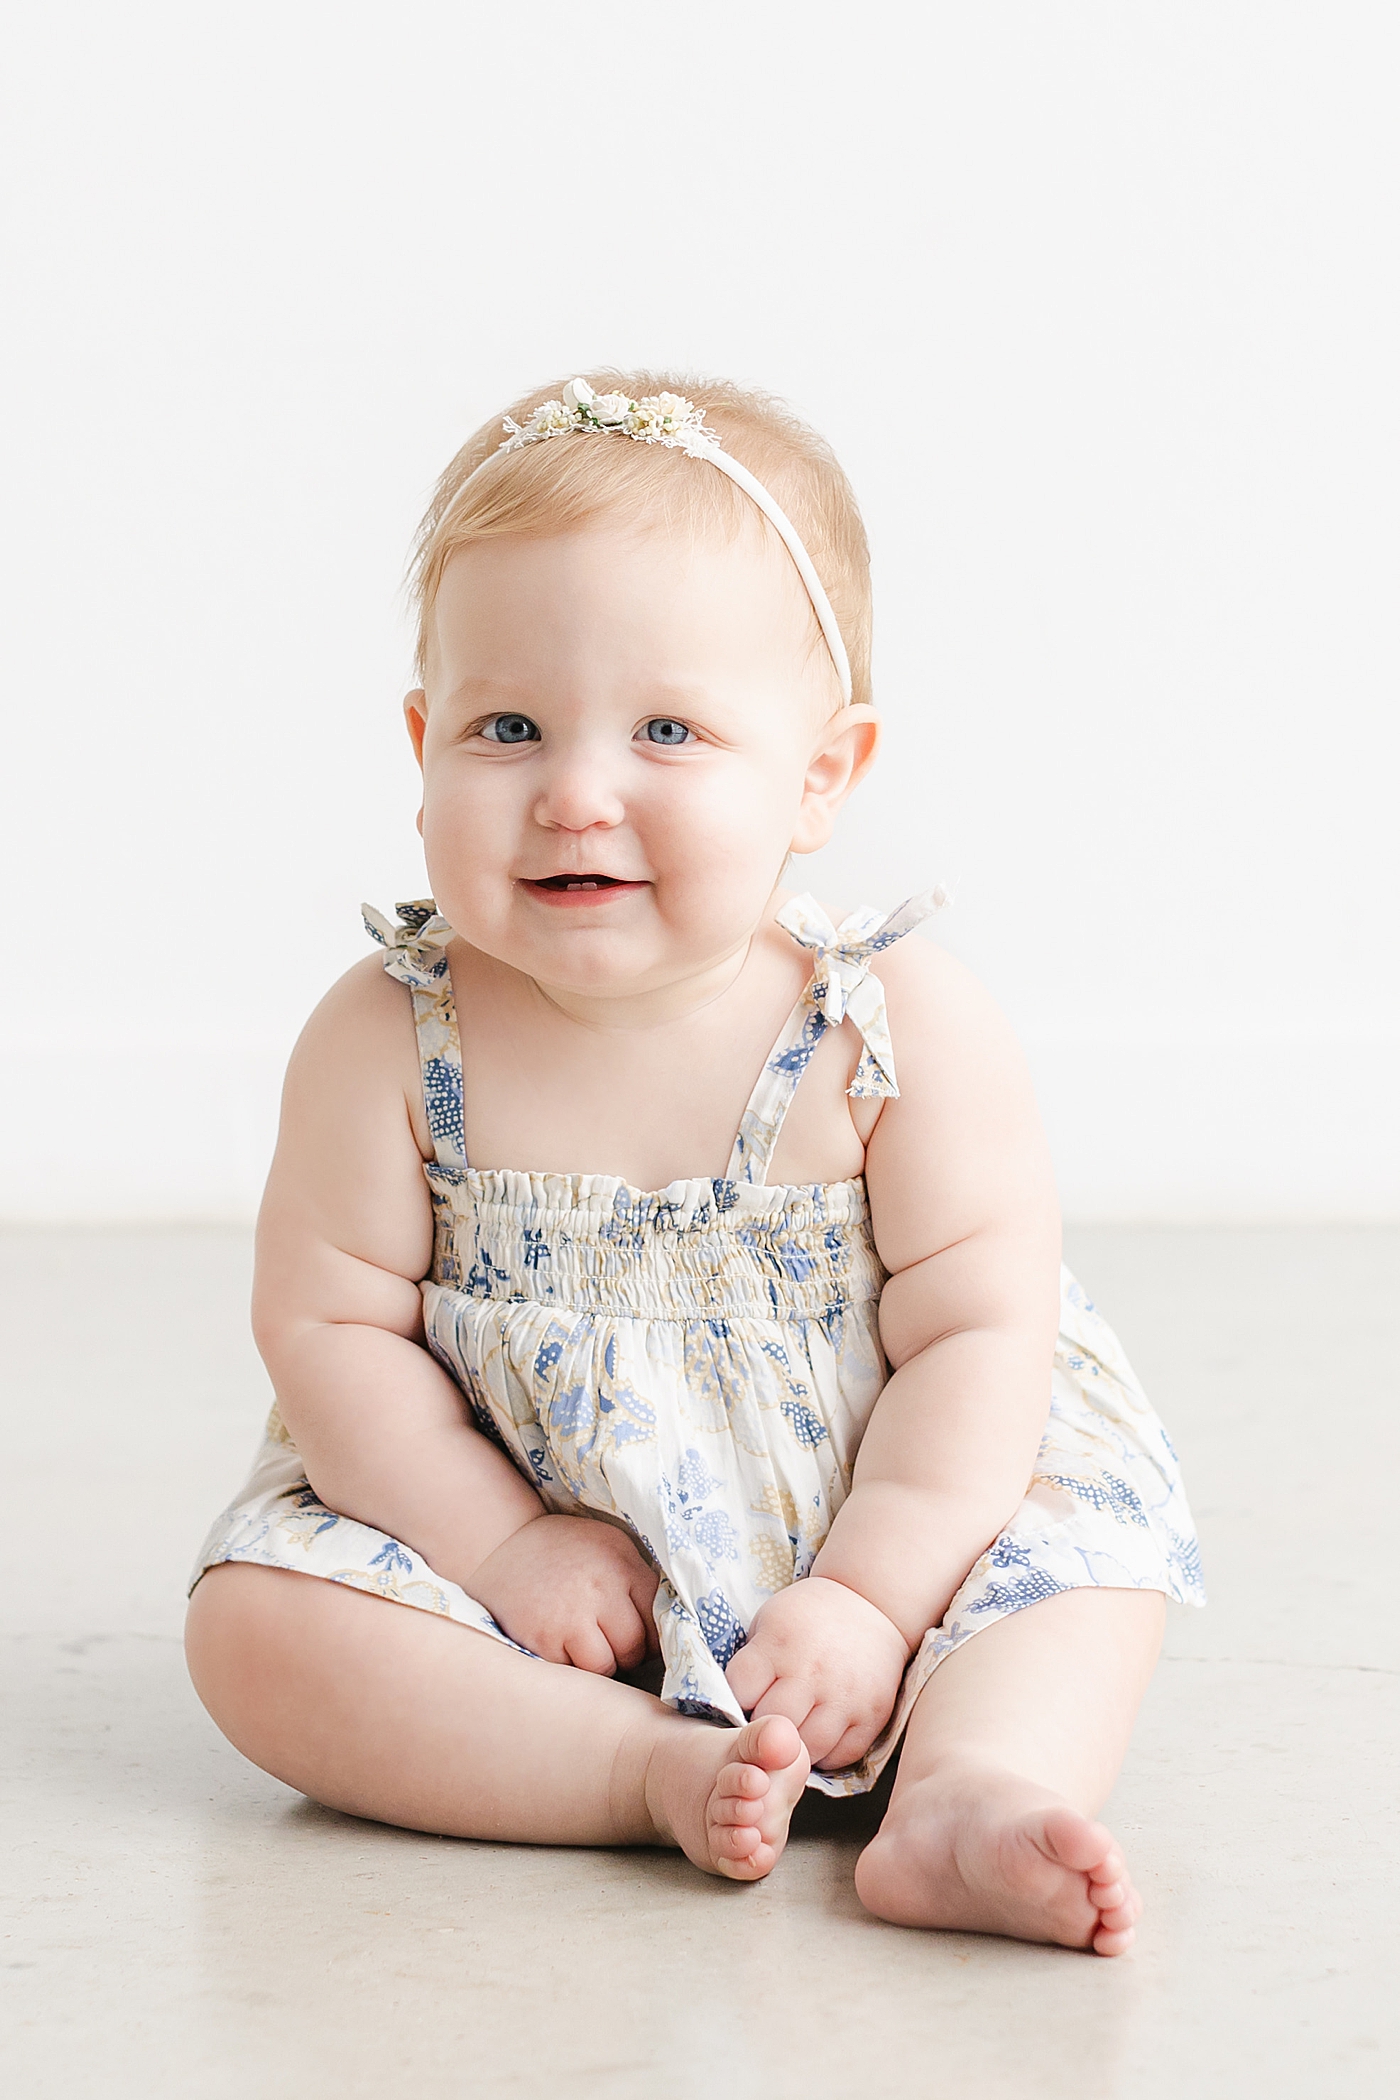 Baby girl in a cream and blue dress sitting and smiling | Sana Ahmed Photography